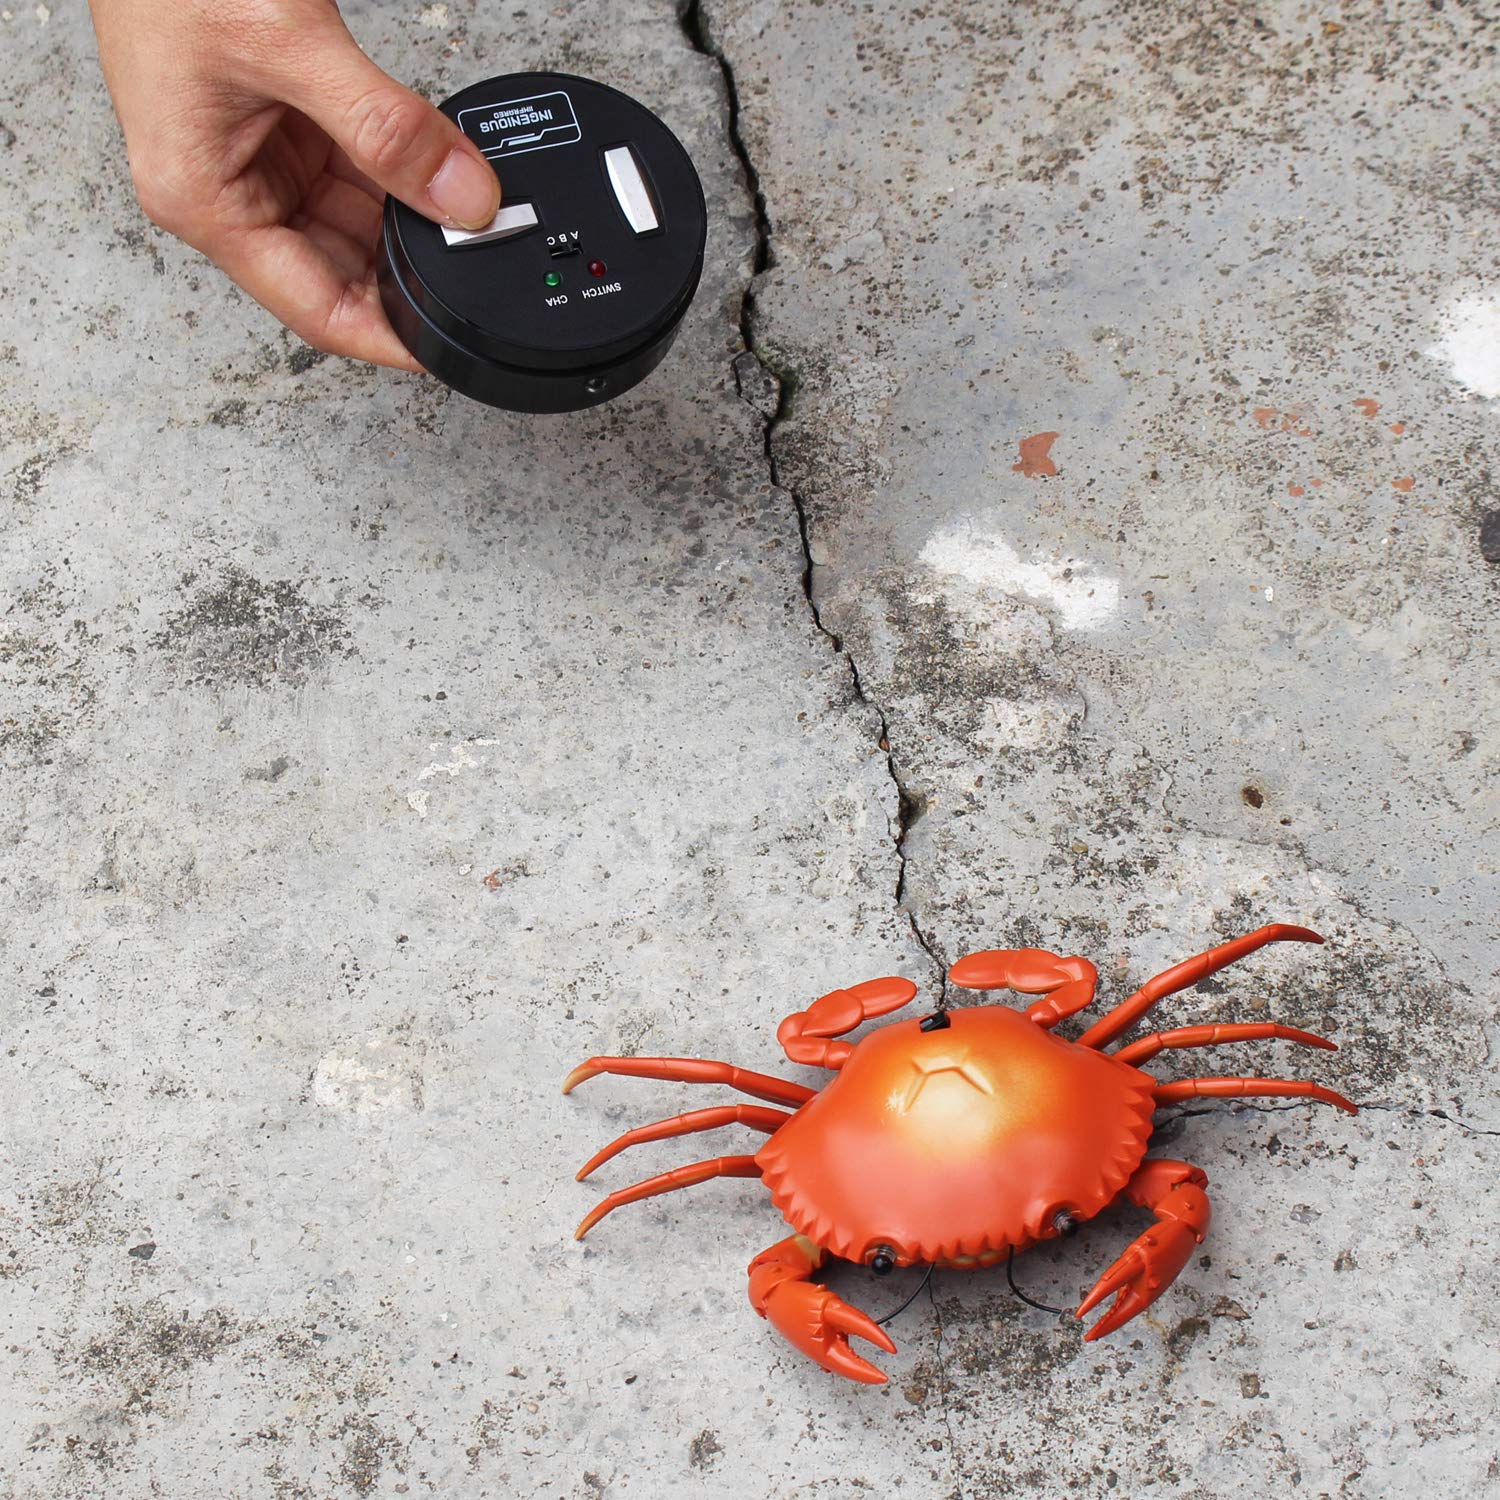 Tipmant RC Crab Animal Toy Remote Control Car Vehicle Electronic Fake Insect for Kids Birthday Gift Christmas Halloween (Red)